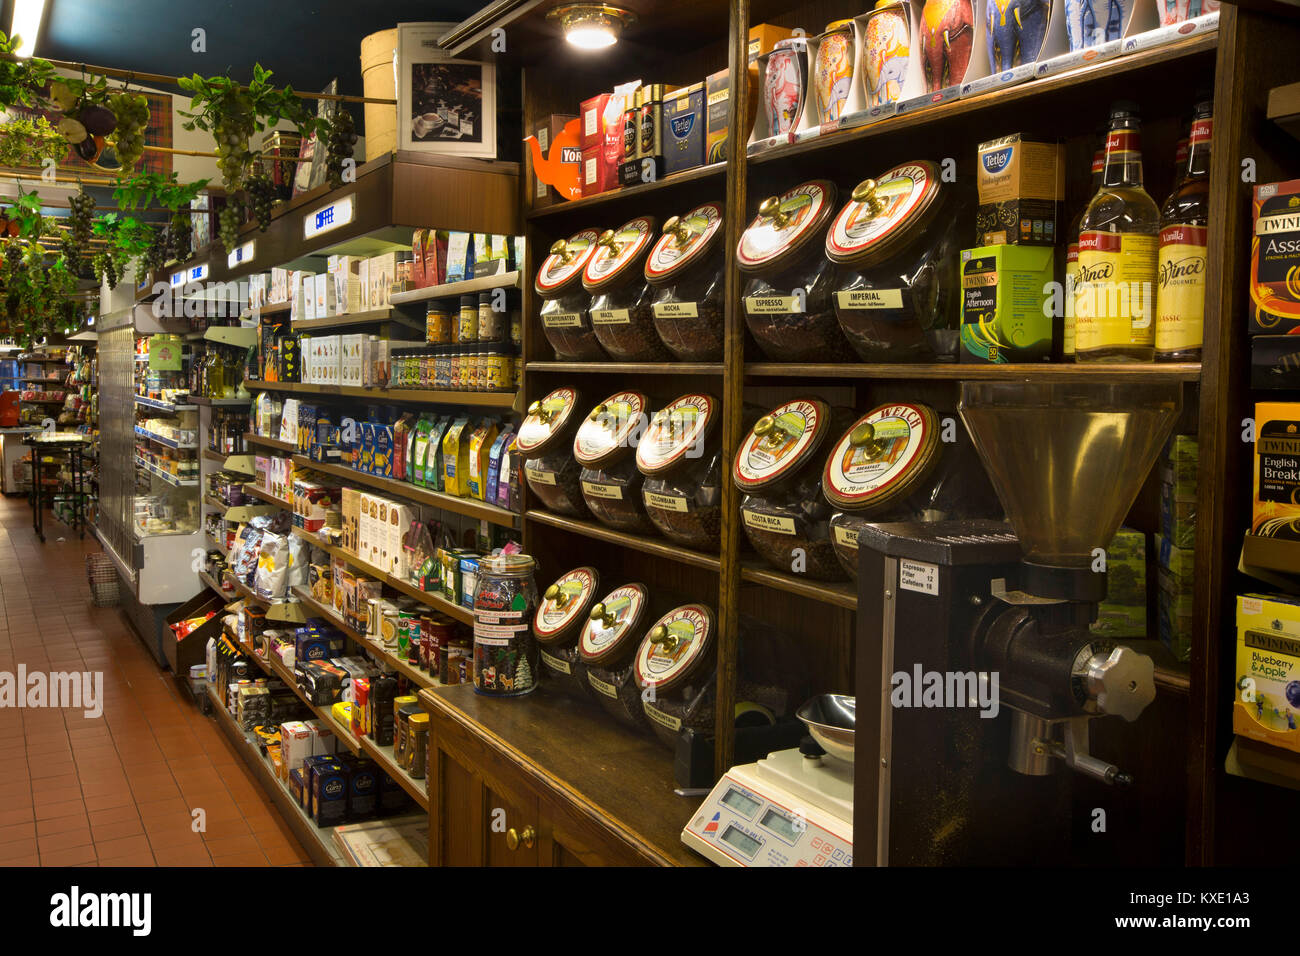 UK, England, Cheshire, Nantwich, Hospital Street, AT Welch (Austin’s) grocer’s shop shelves, coffee jars Stock Photo